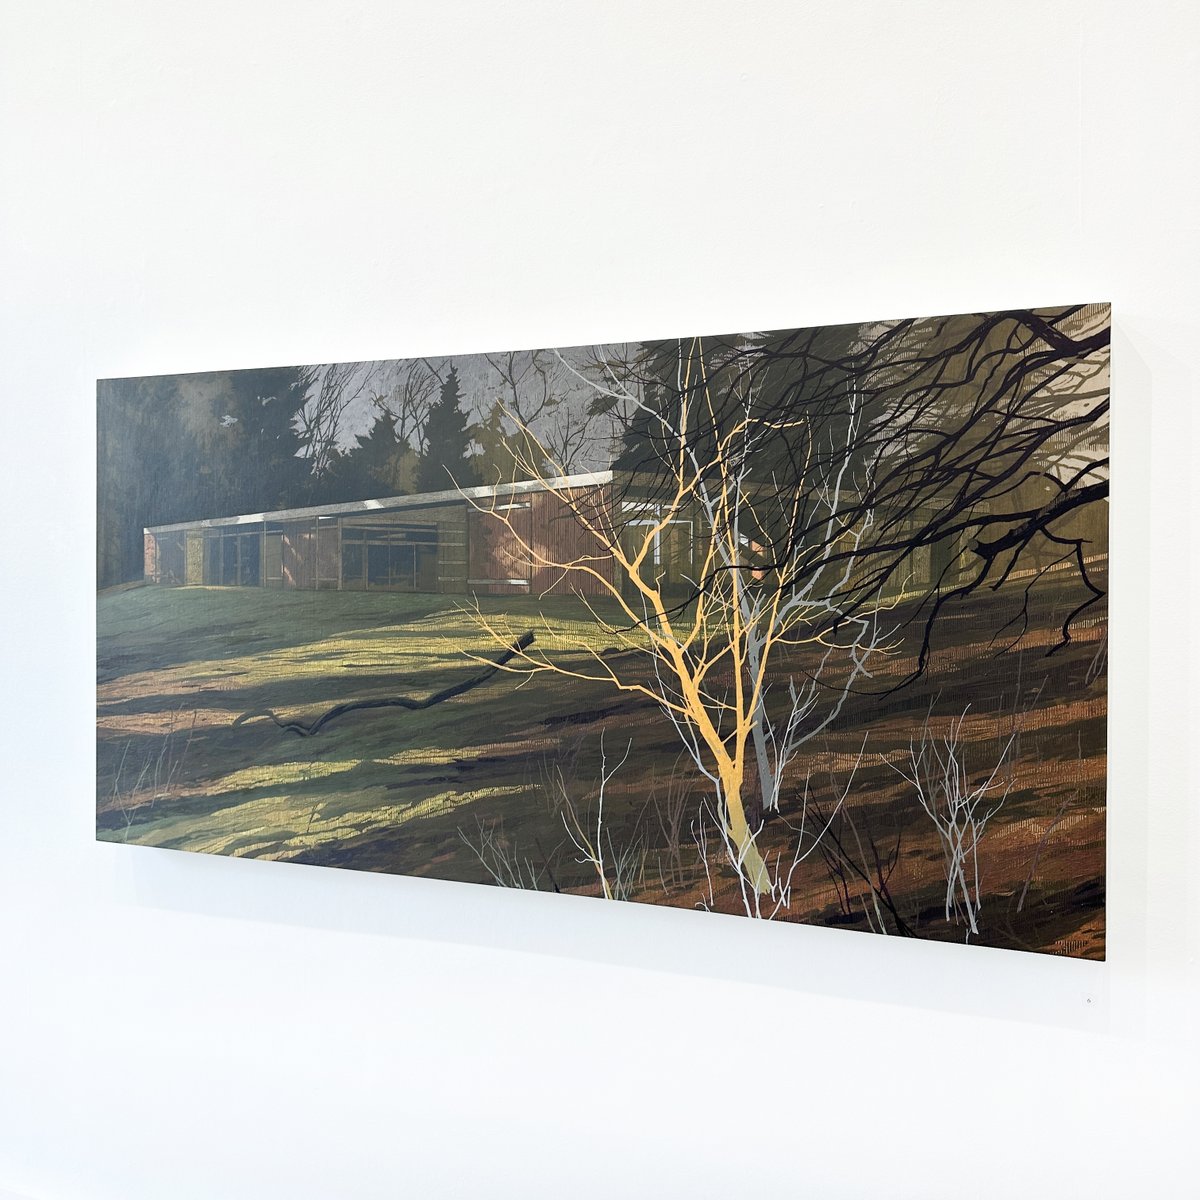 Mackenzie became fascinated by this building, Klein and Womersley when he moved to the area in 2007. This series of paintings celebrate the beauty of this structure and its balanced relationship with the surrounding landscape. More info: bitly.ws/3e48U 📸 House 1